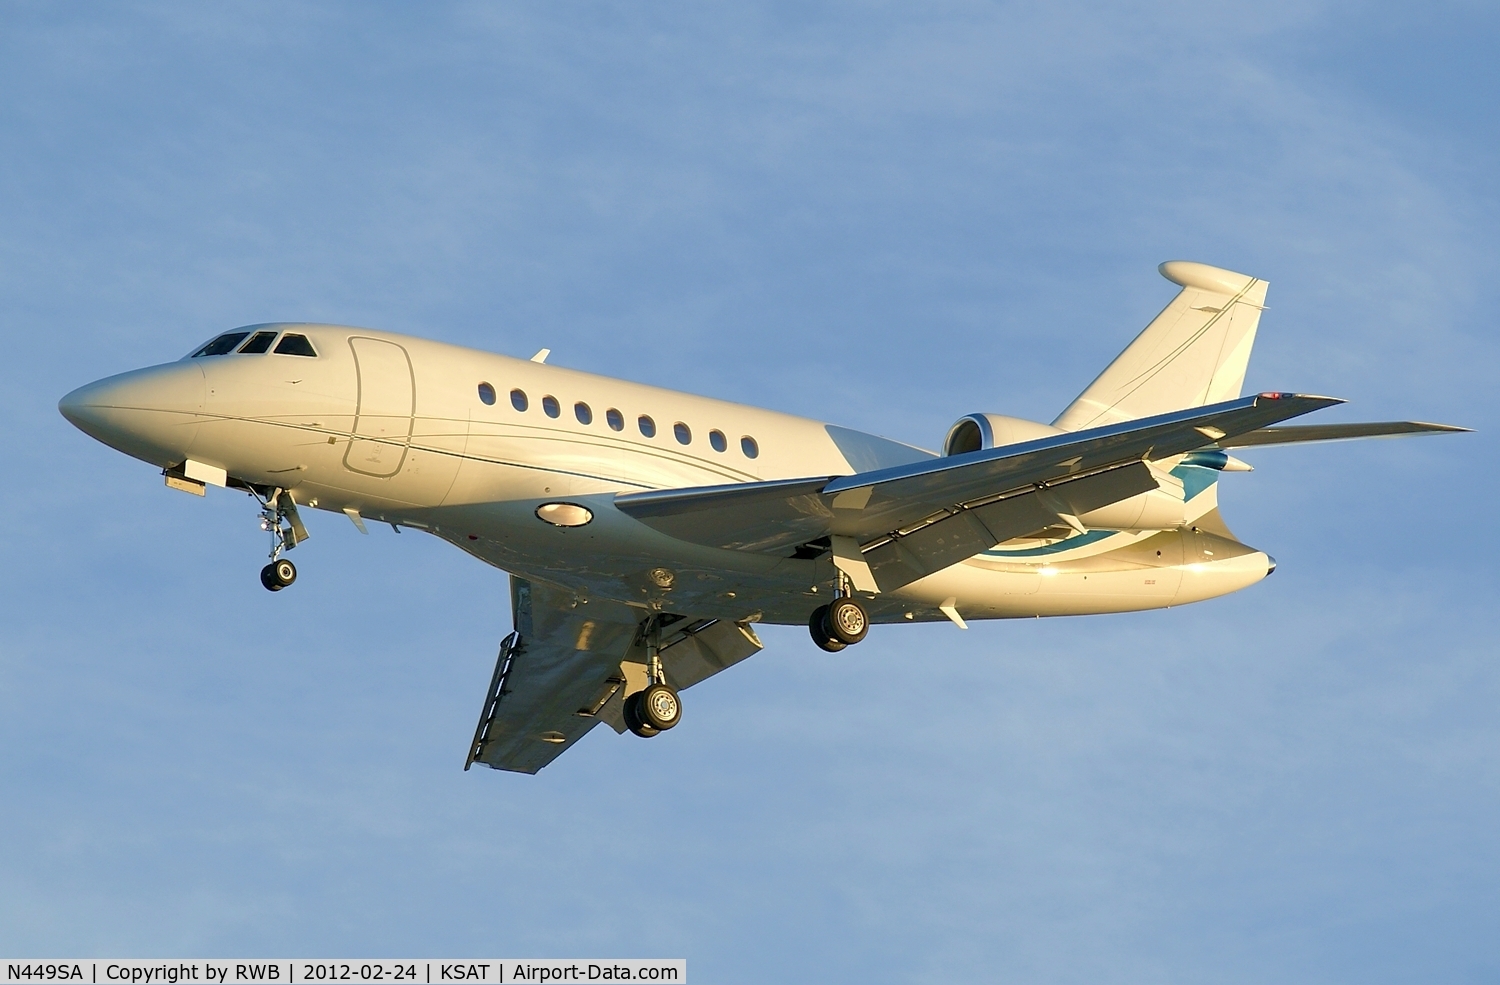 N449SA, 2008 Dassault Falcon 2000EX C/N 171, On approach 3 at sunset.